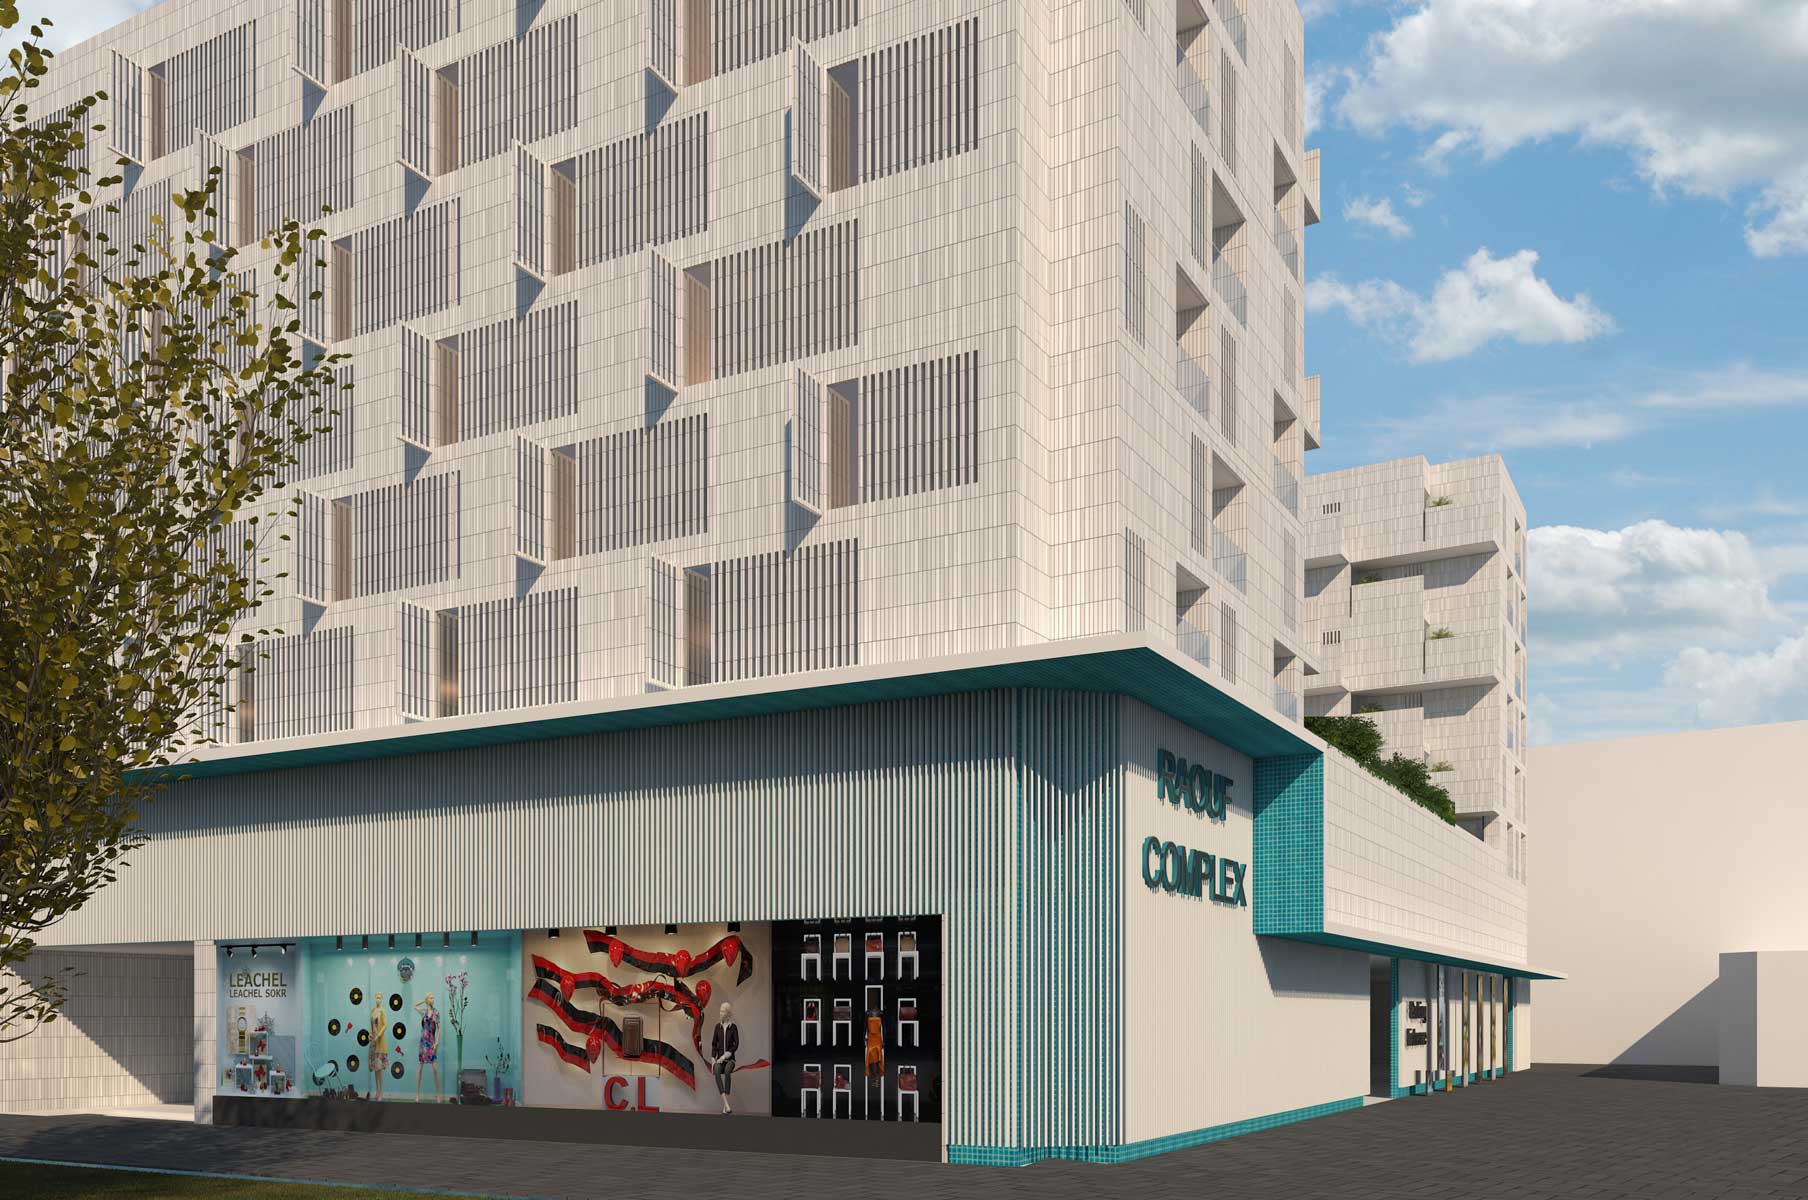 17- Raouf Mixed-Use Building